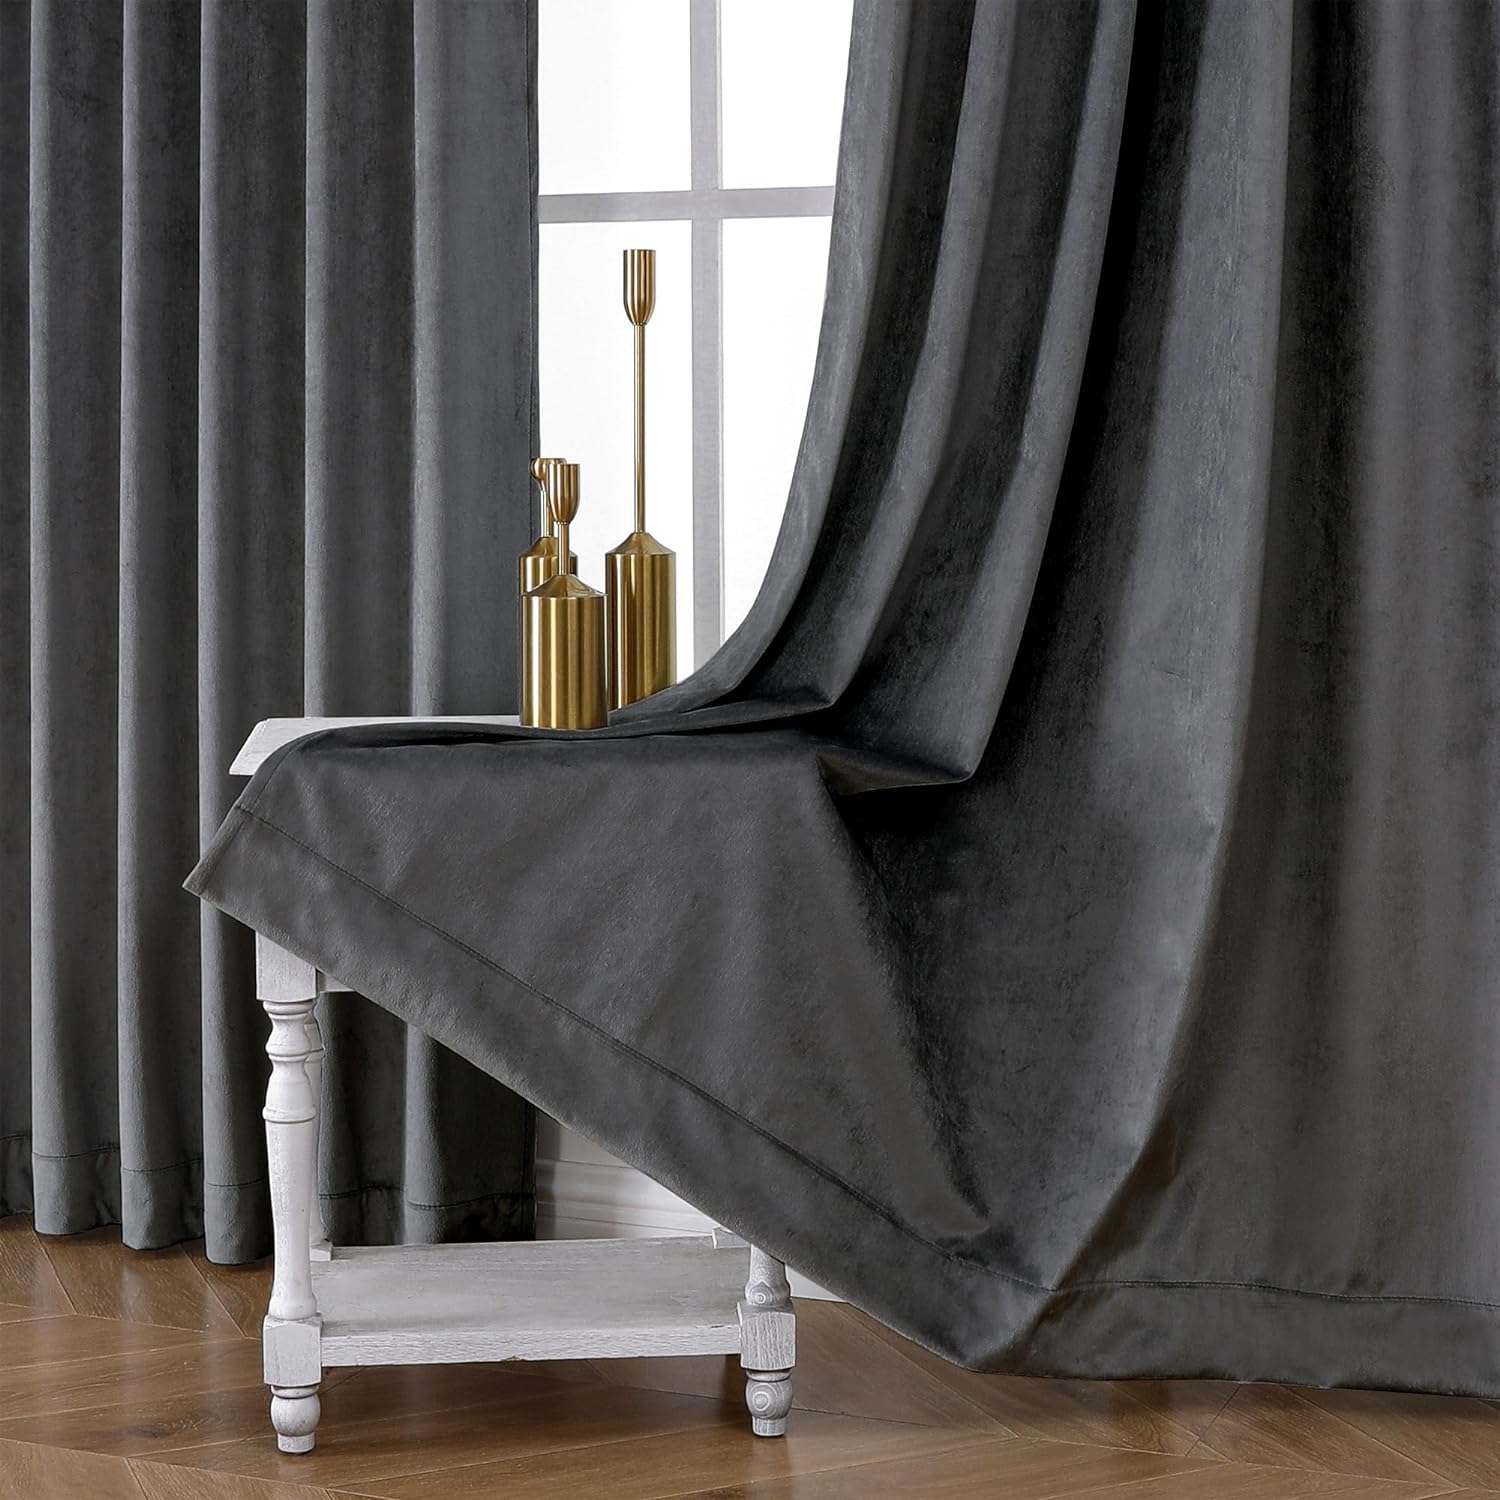 OWENIE Odette Silver Velvet Curtains [2 Panels] Total Blackout Elegant Back Tab Warm Curtains Thermal Insulated Soundproof Energy Efficiency Curtains/Drapes for Classical Living Room Bedroom 52 x 63